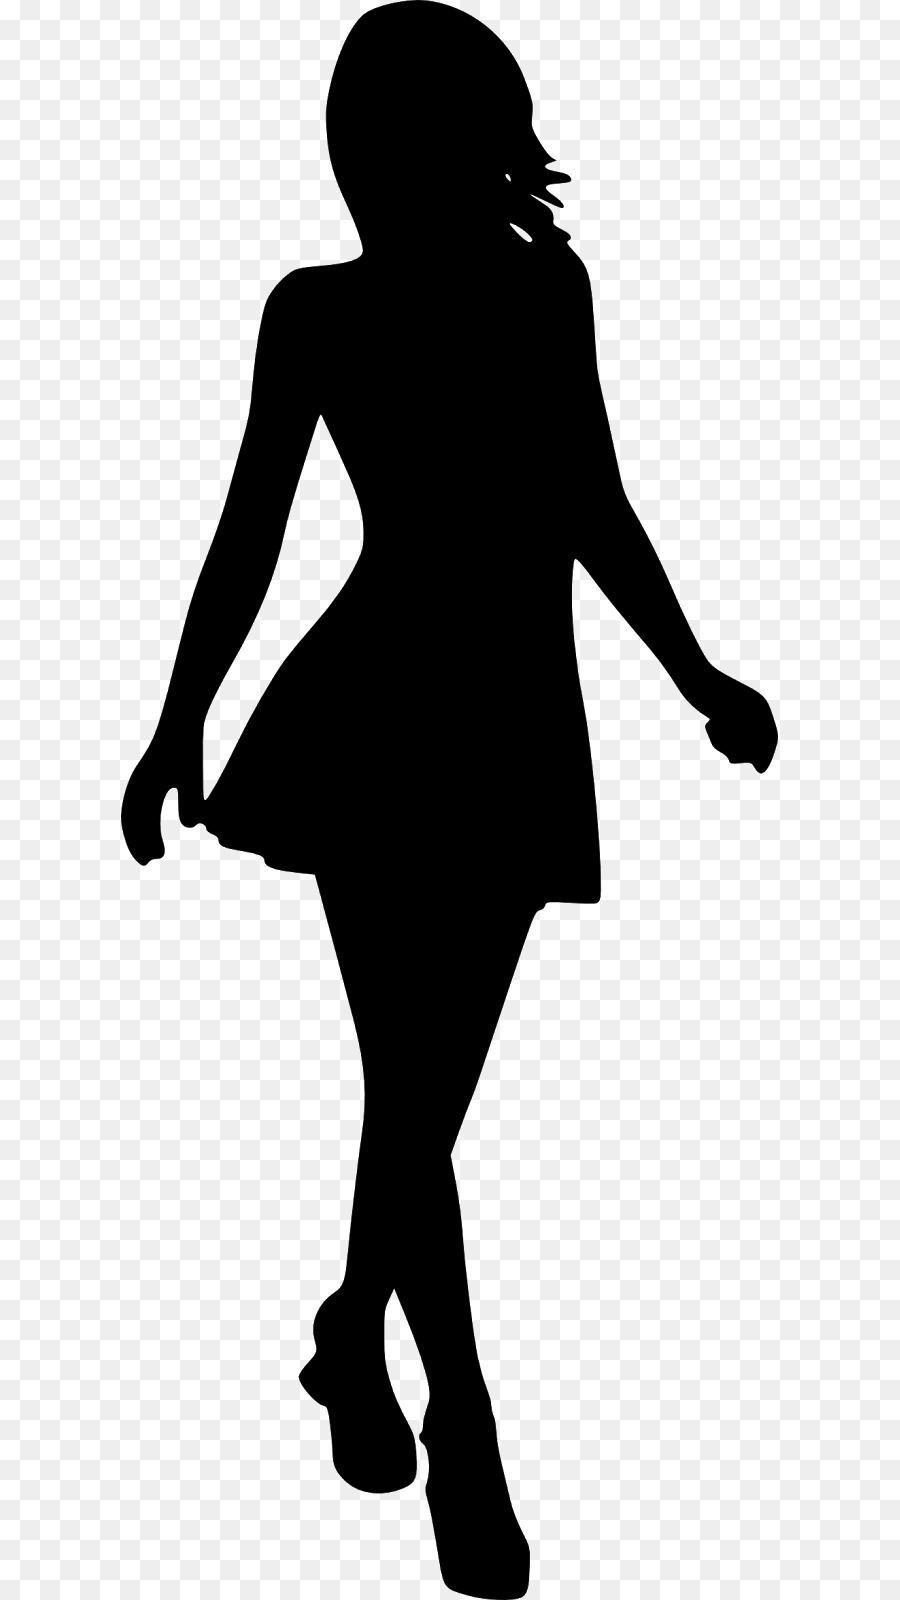 Woman Silhouette Female Clip art - Women Silouette png download - 399*886 - Free Transparent Woman png Download.